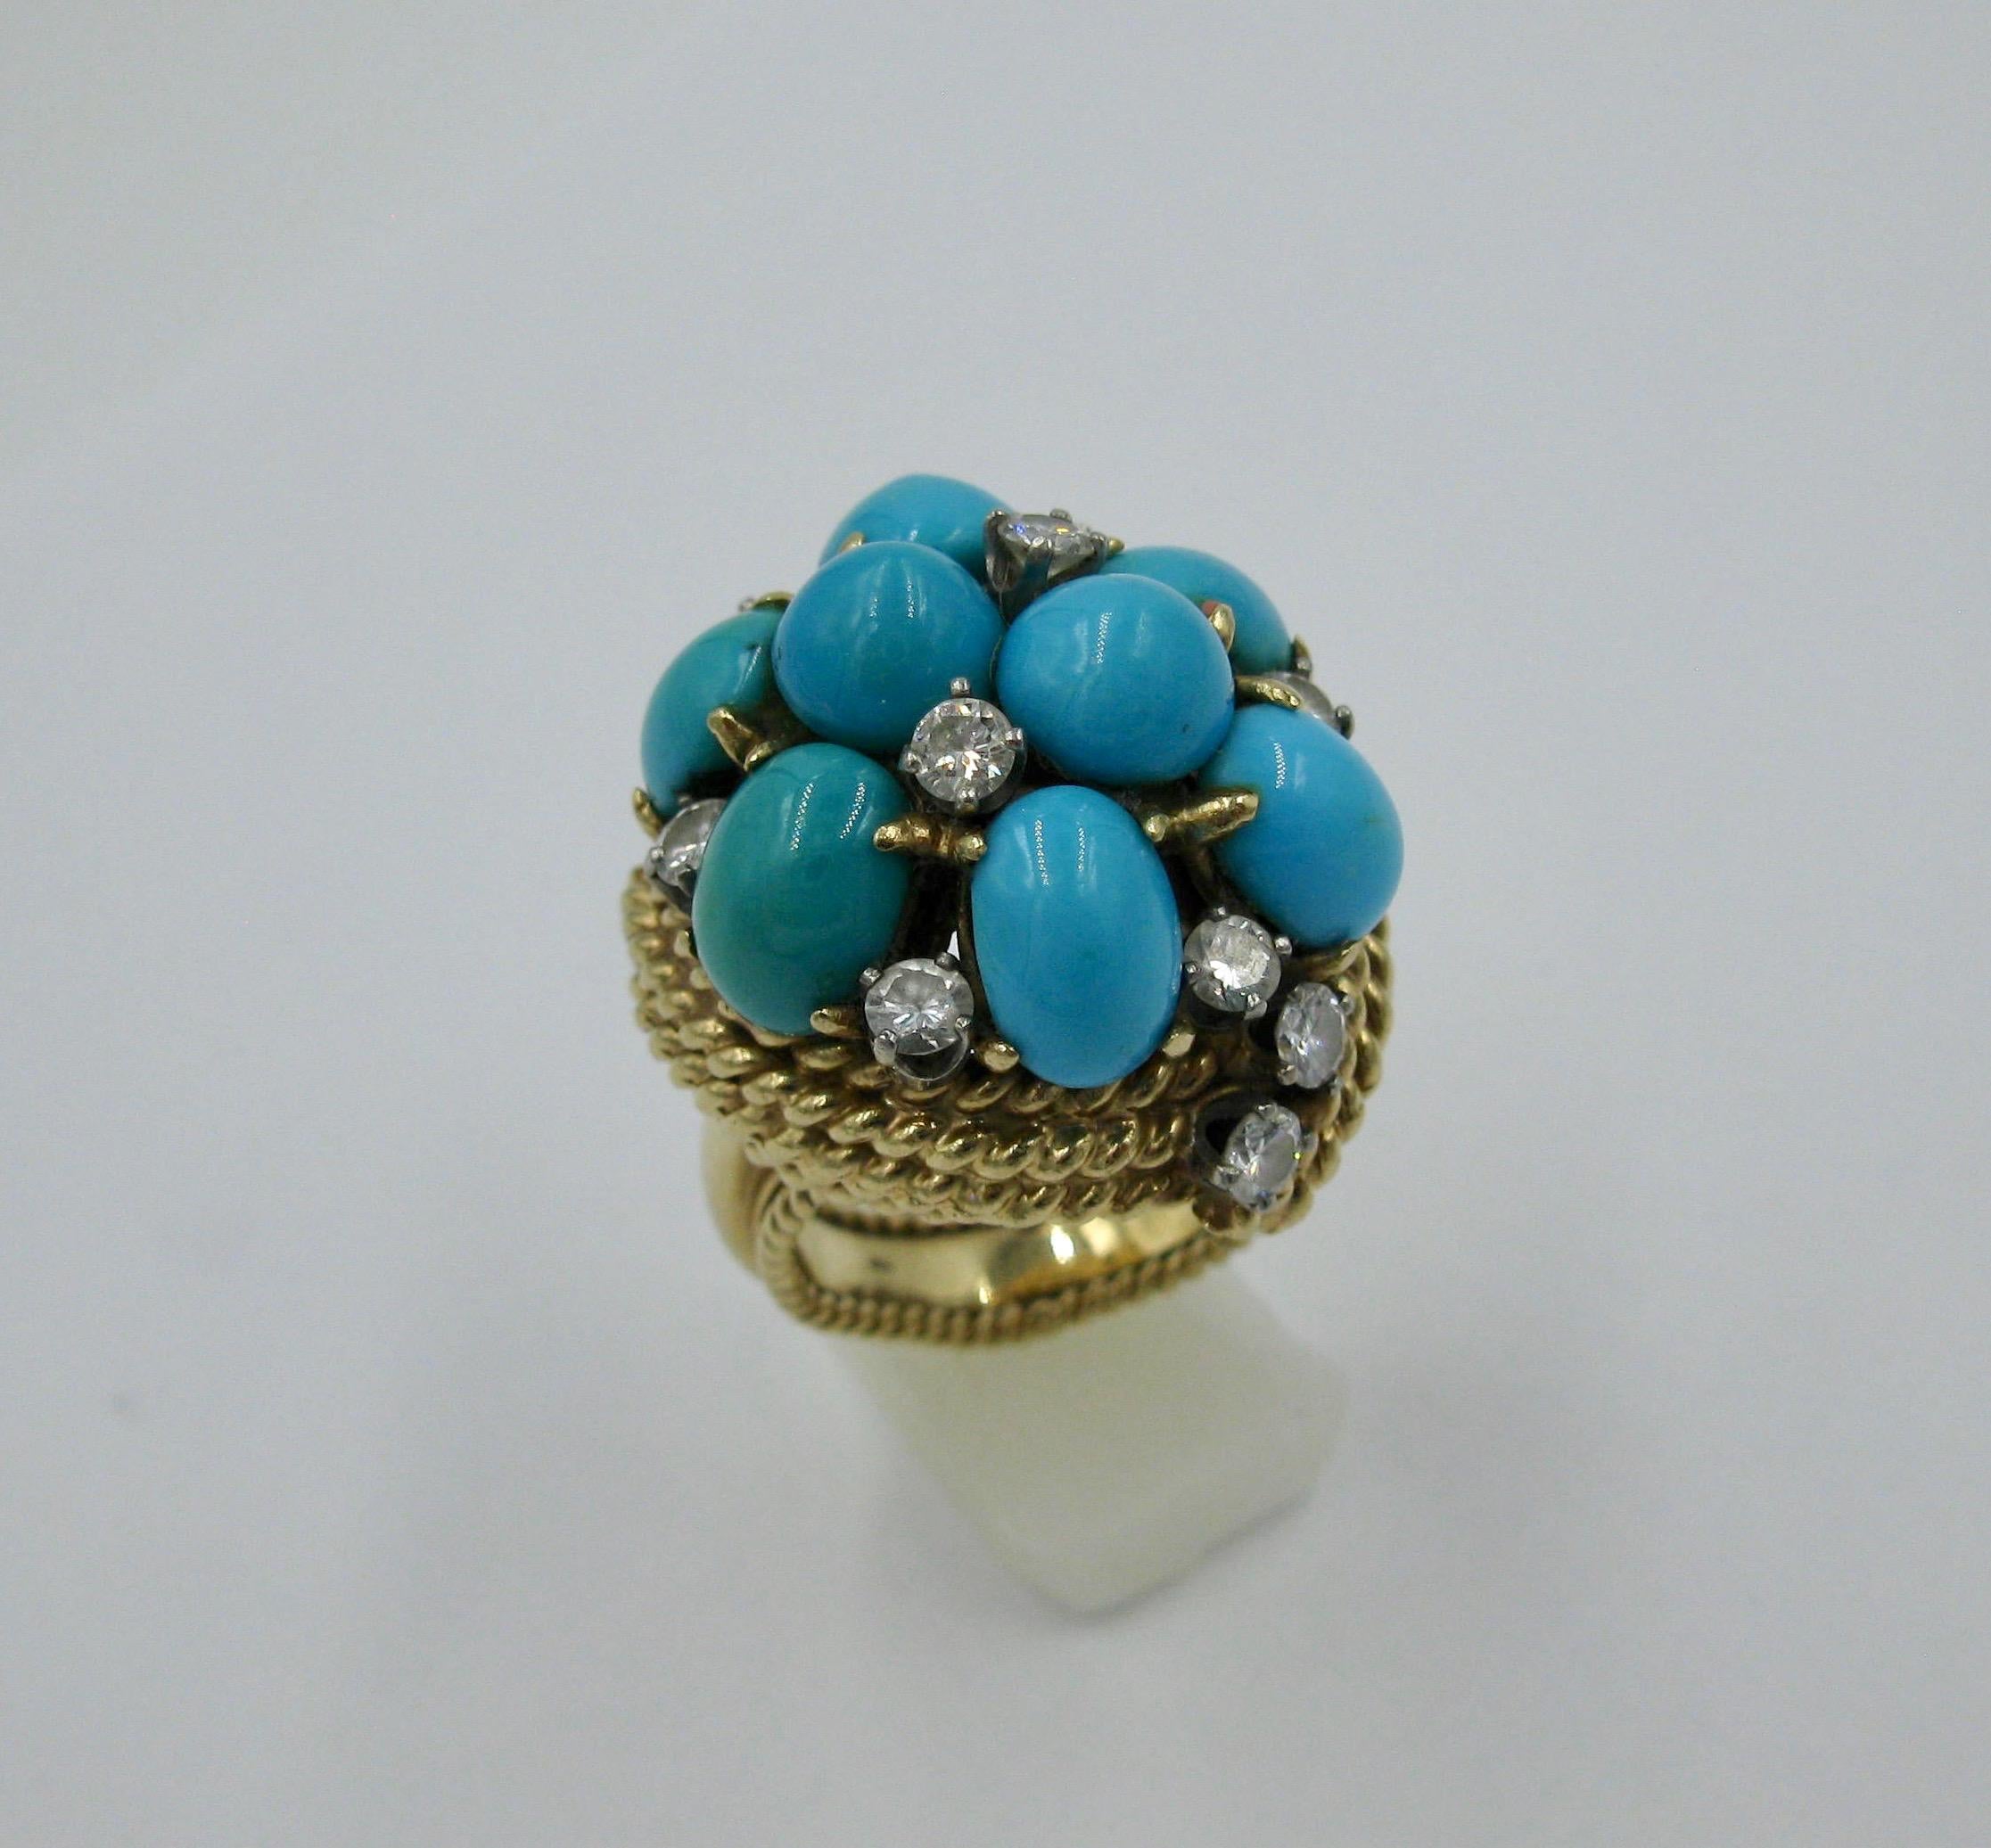 Persian Turquoise 1.5 Carat Diamond Cocktail Ring 14 Karat Gold  Mid Century In Excellent Condition For Sale In New York, NY